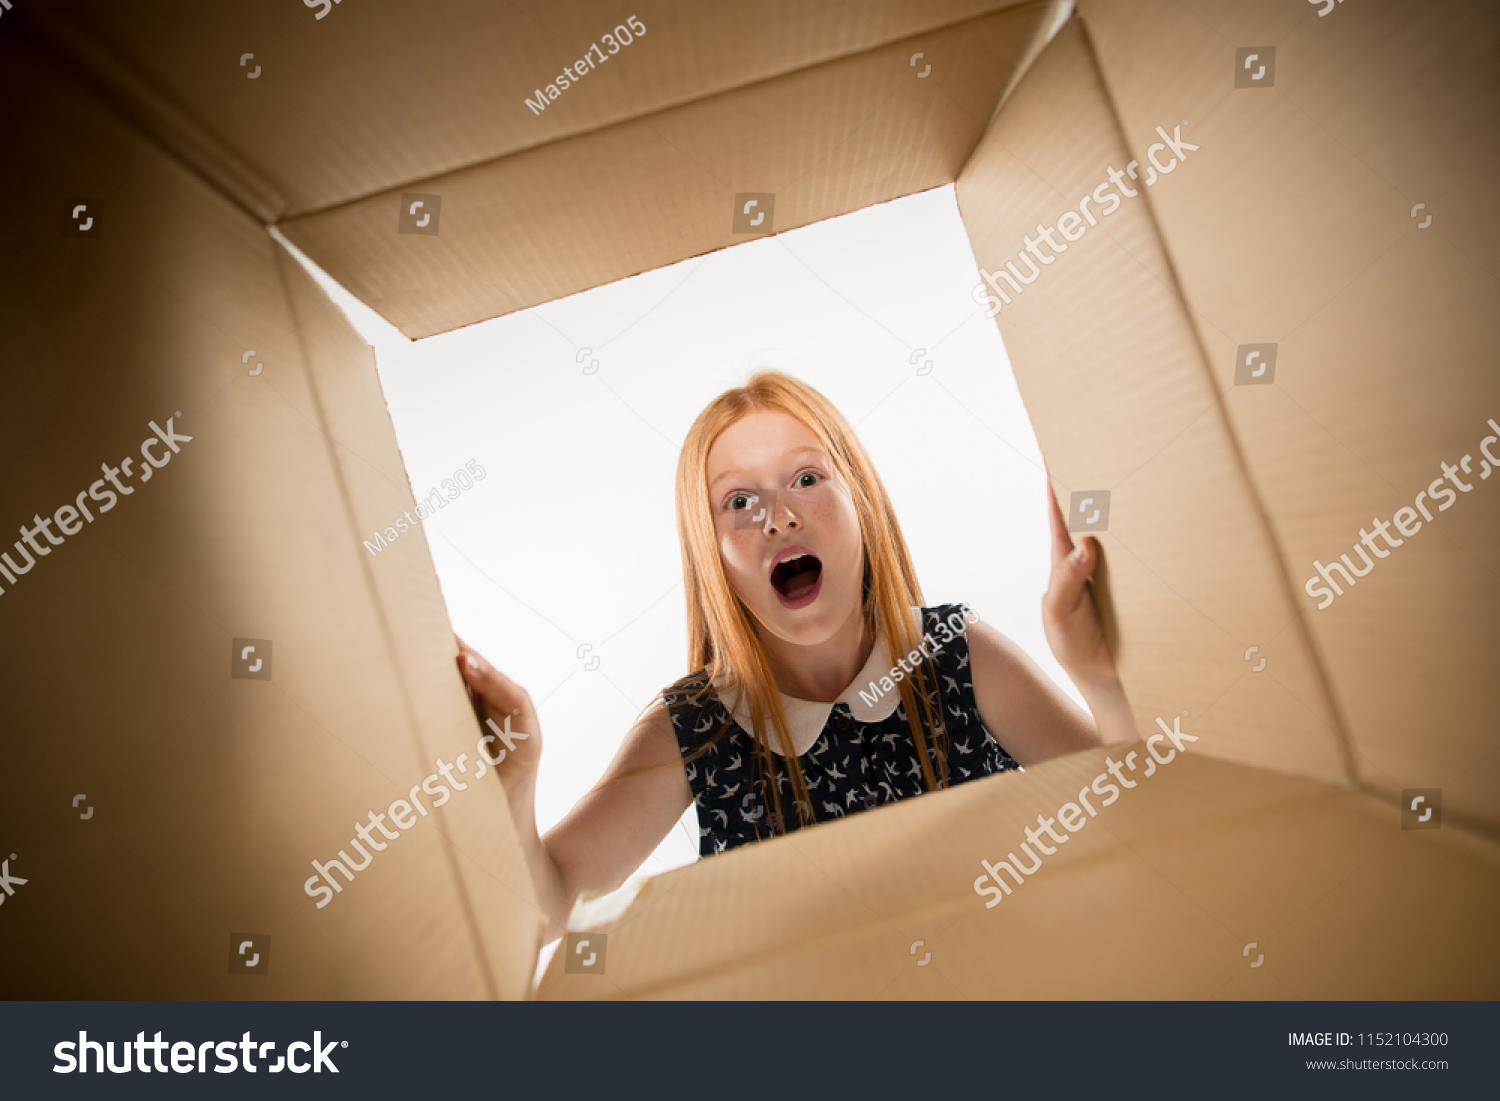 The surprised girl unpacking, opening carton box and looking inside. The package, delivery, surprise, gift lifestyle concept. Human emotions and facial expressions concepts #1152104300